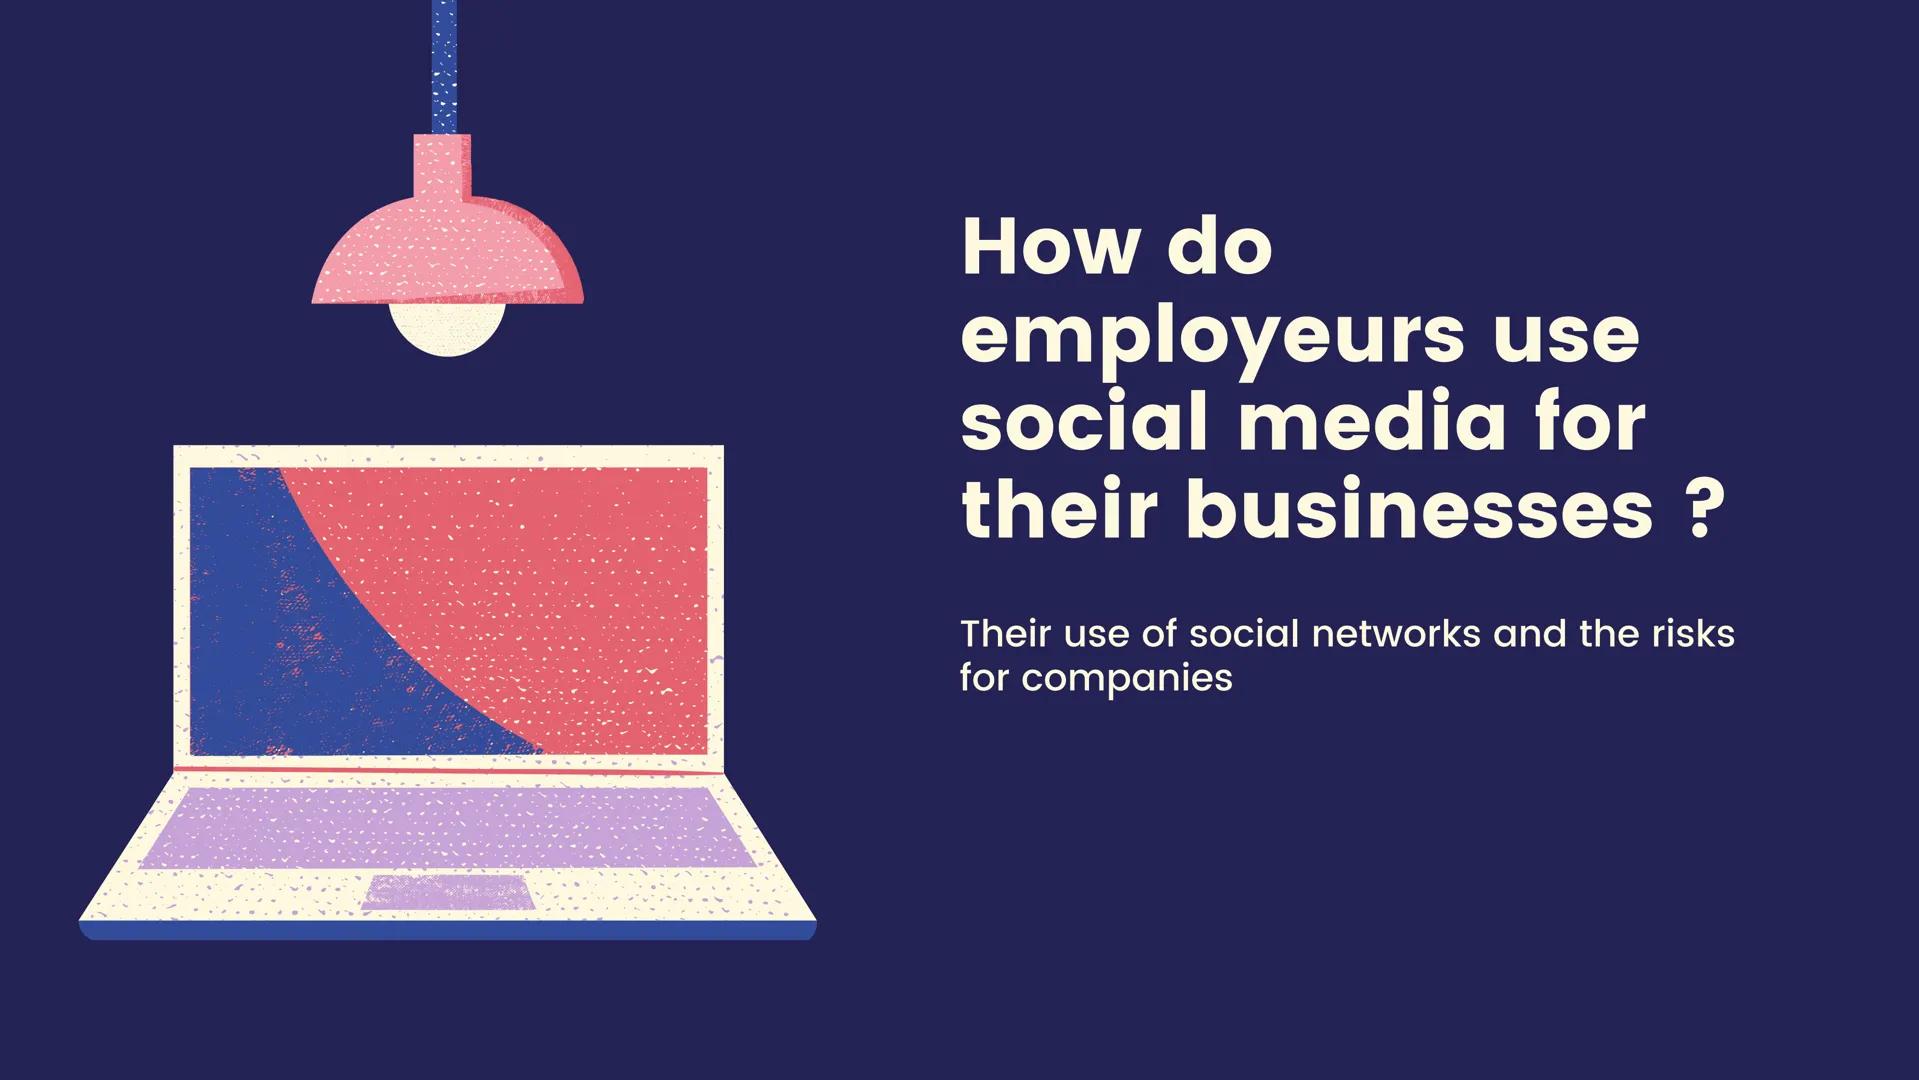 How do
employeurs use
social media for
their businesses ?
Their use of social networks and the risks
for companies To recruit employees
in
a